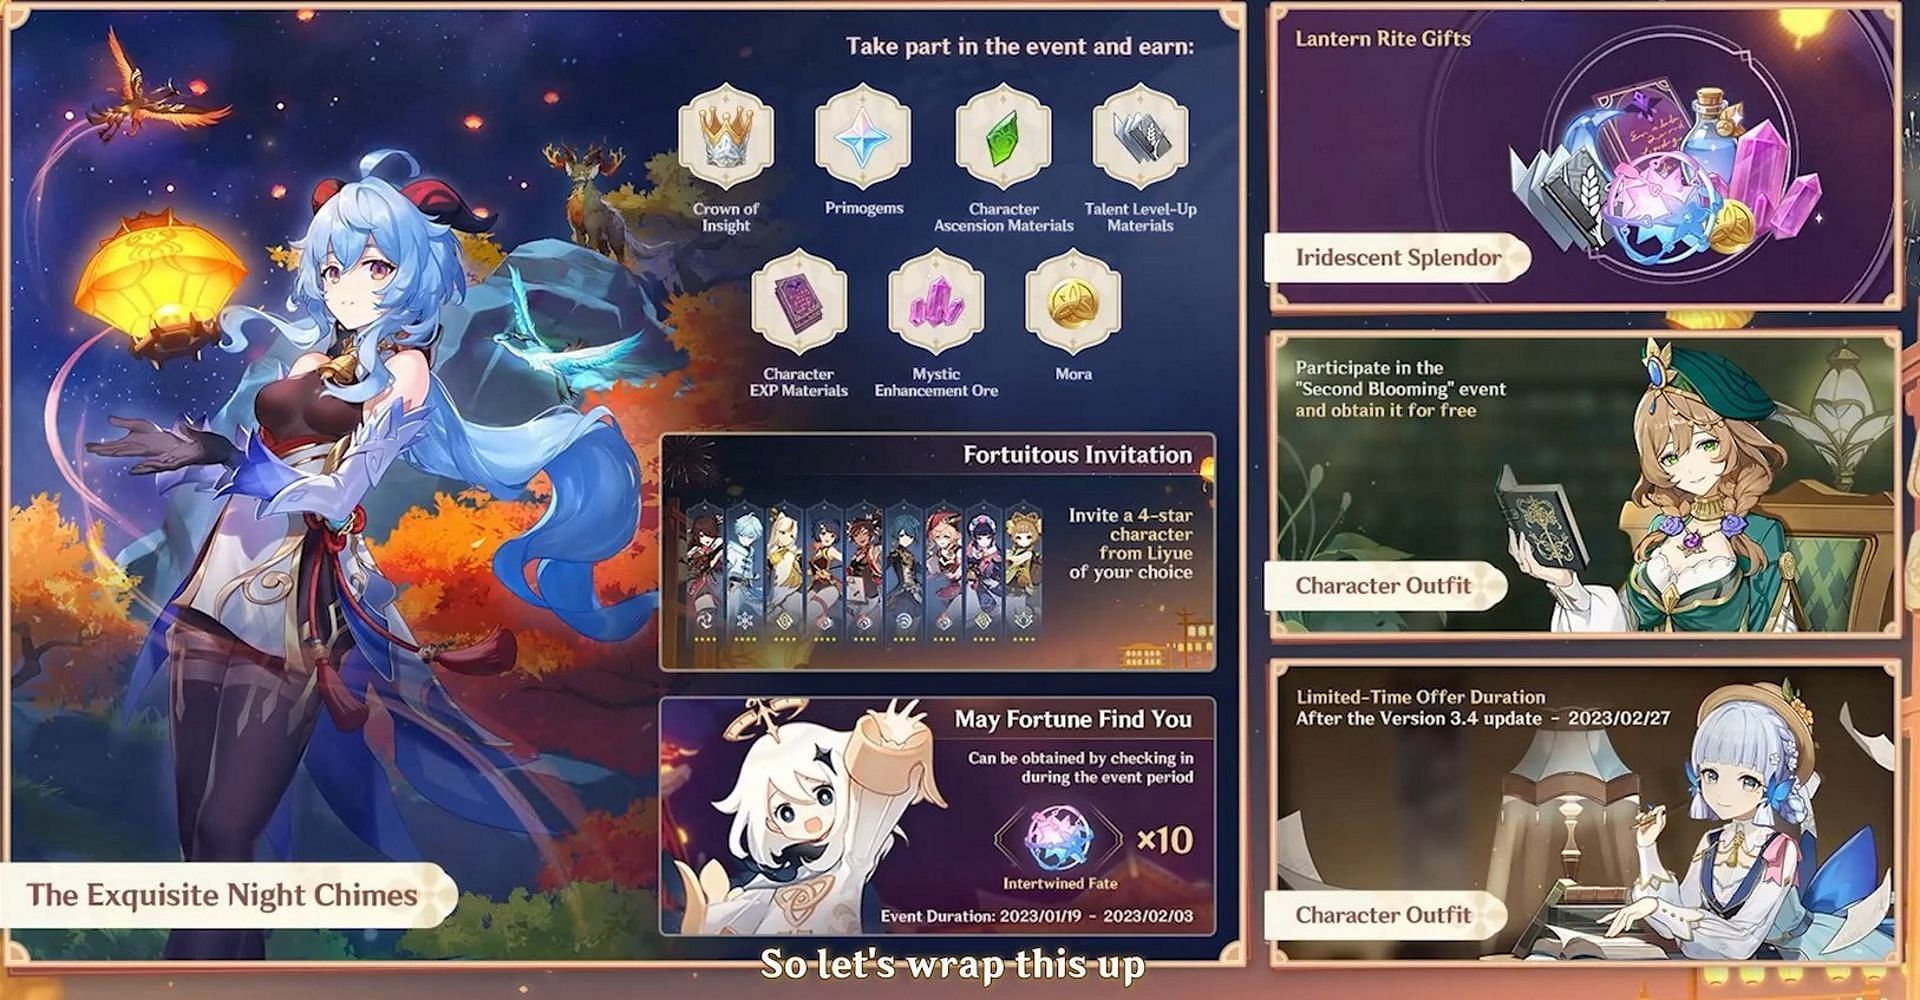 The free 10 Fates can be seen in the &quot;May Fortune Find You&quot; section at the bottom (Image via HoYoverse)